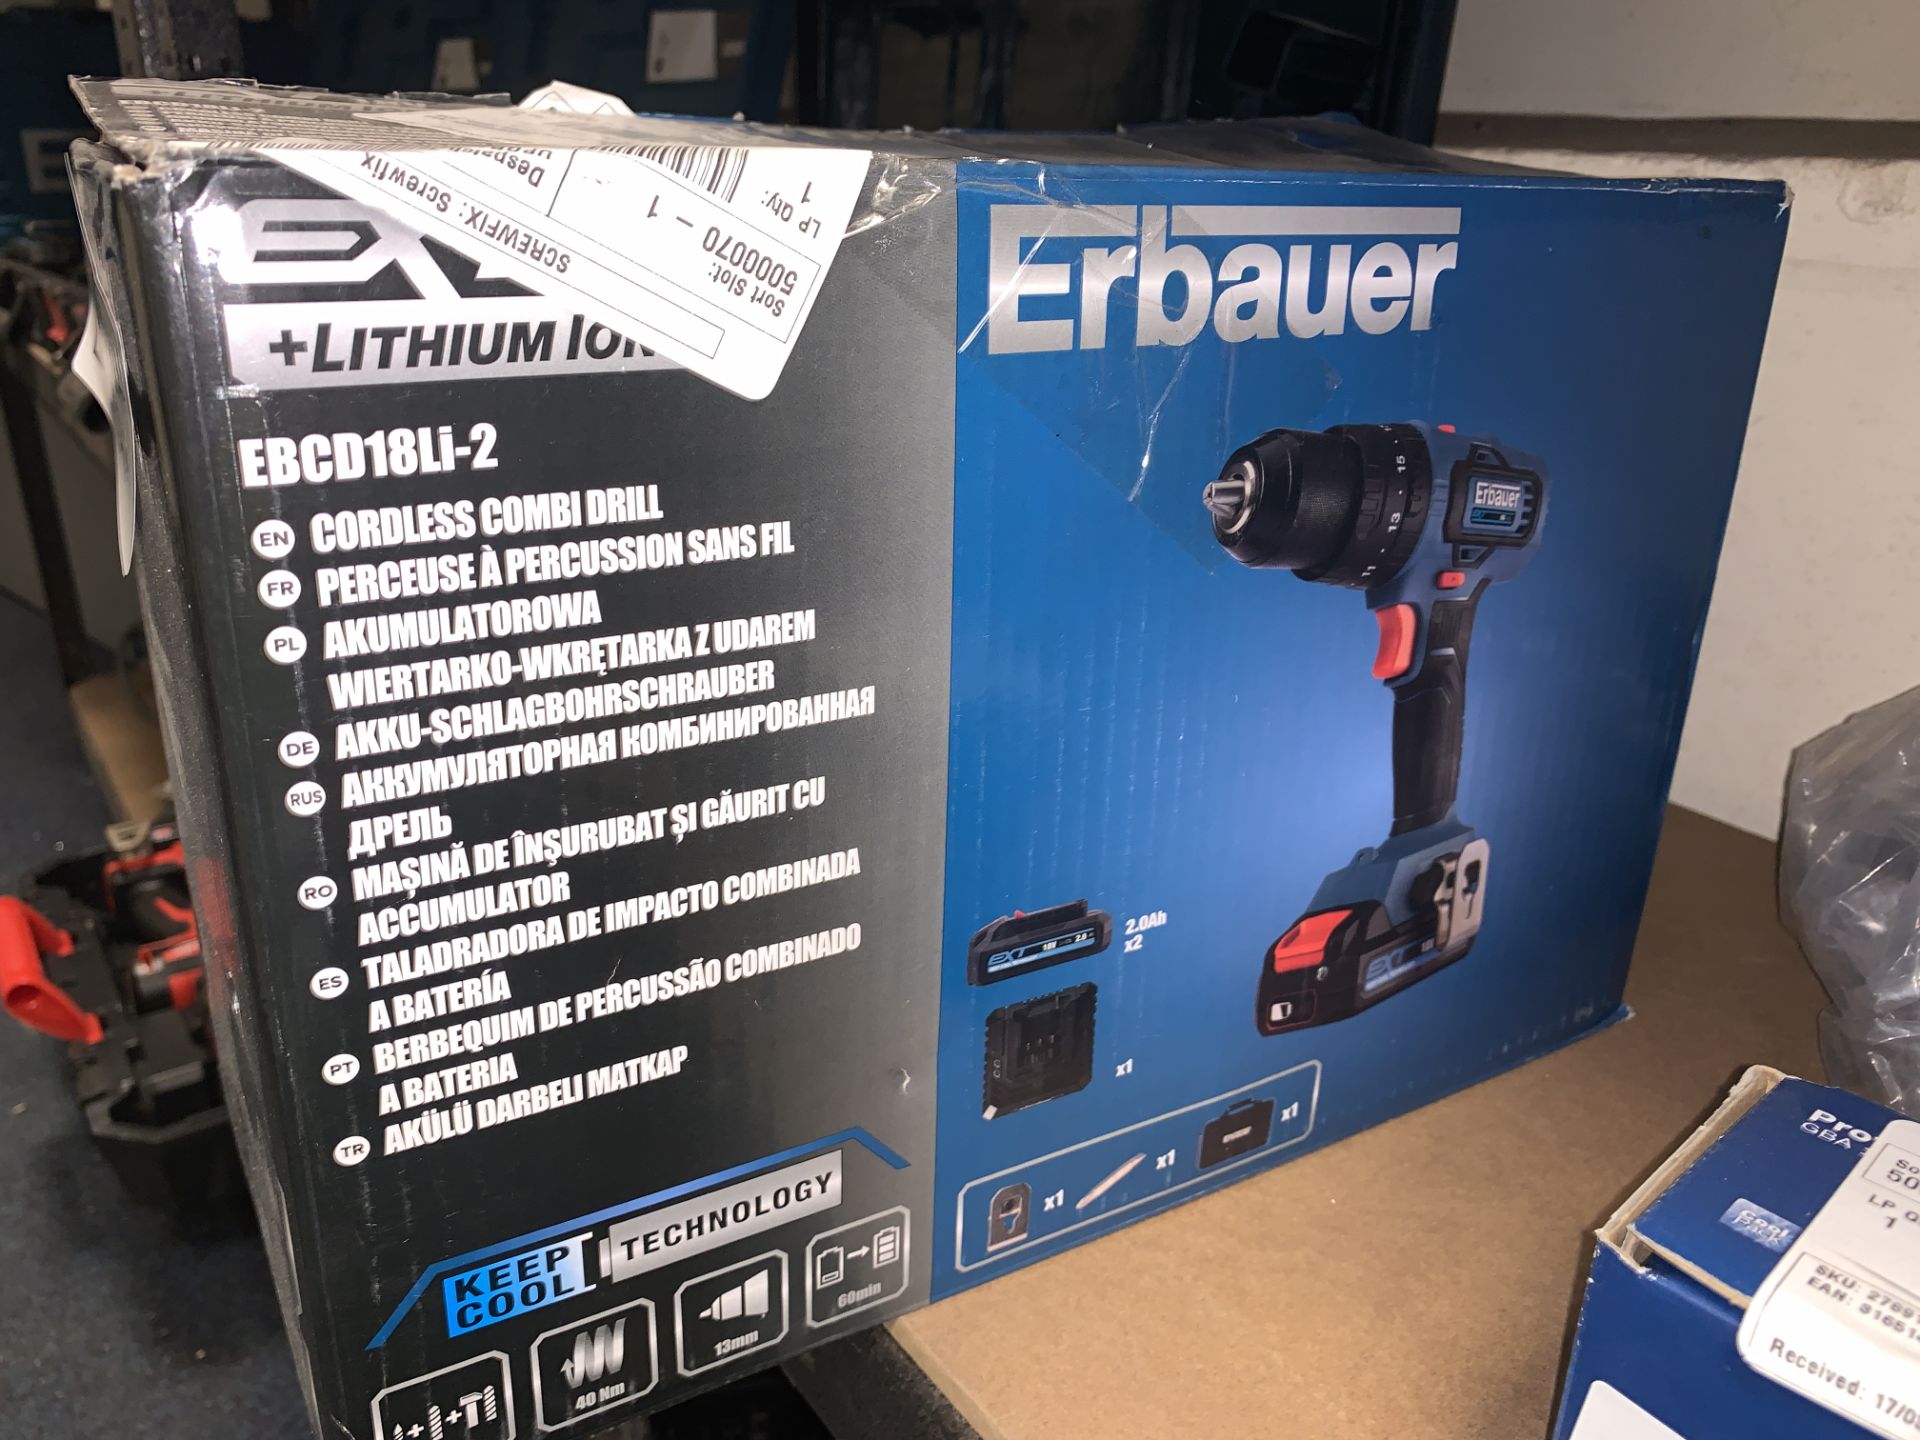 ERBAUER EBCD18LI-2 18V 2.0AH LI-ION EXT CORDLESS COMBI DRILL COMES WITH BOX (UNCHECKED, UNTESTED)